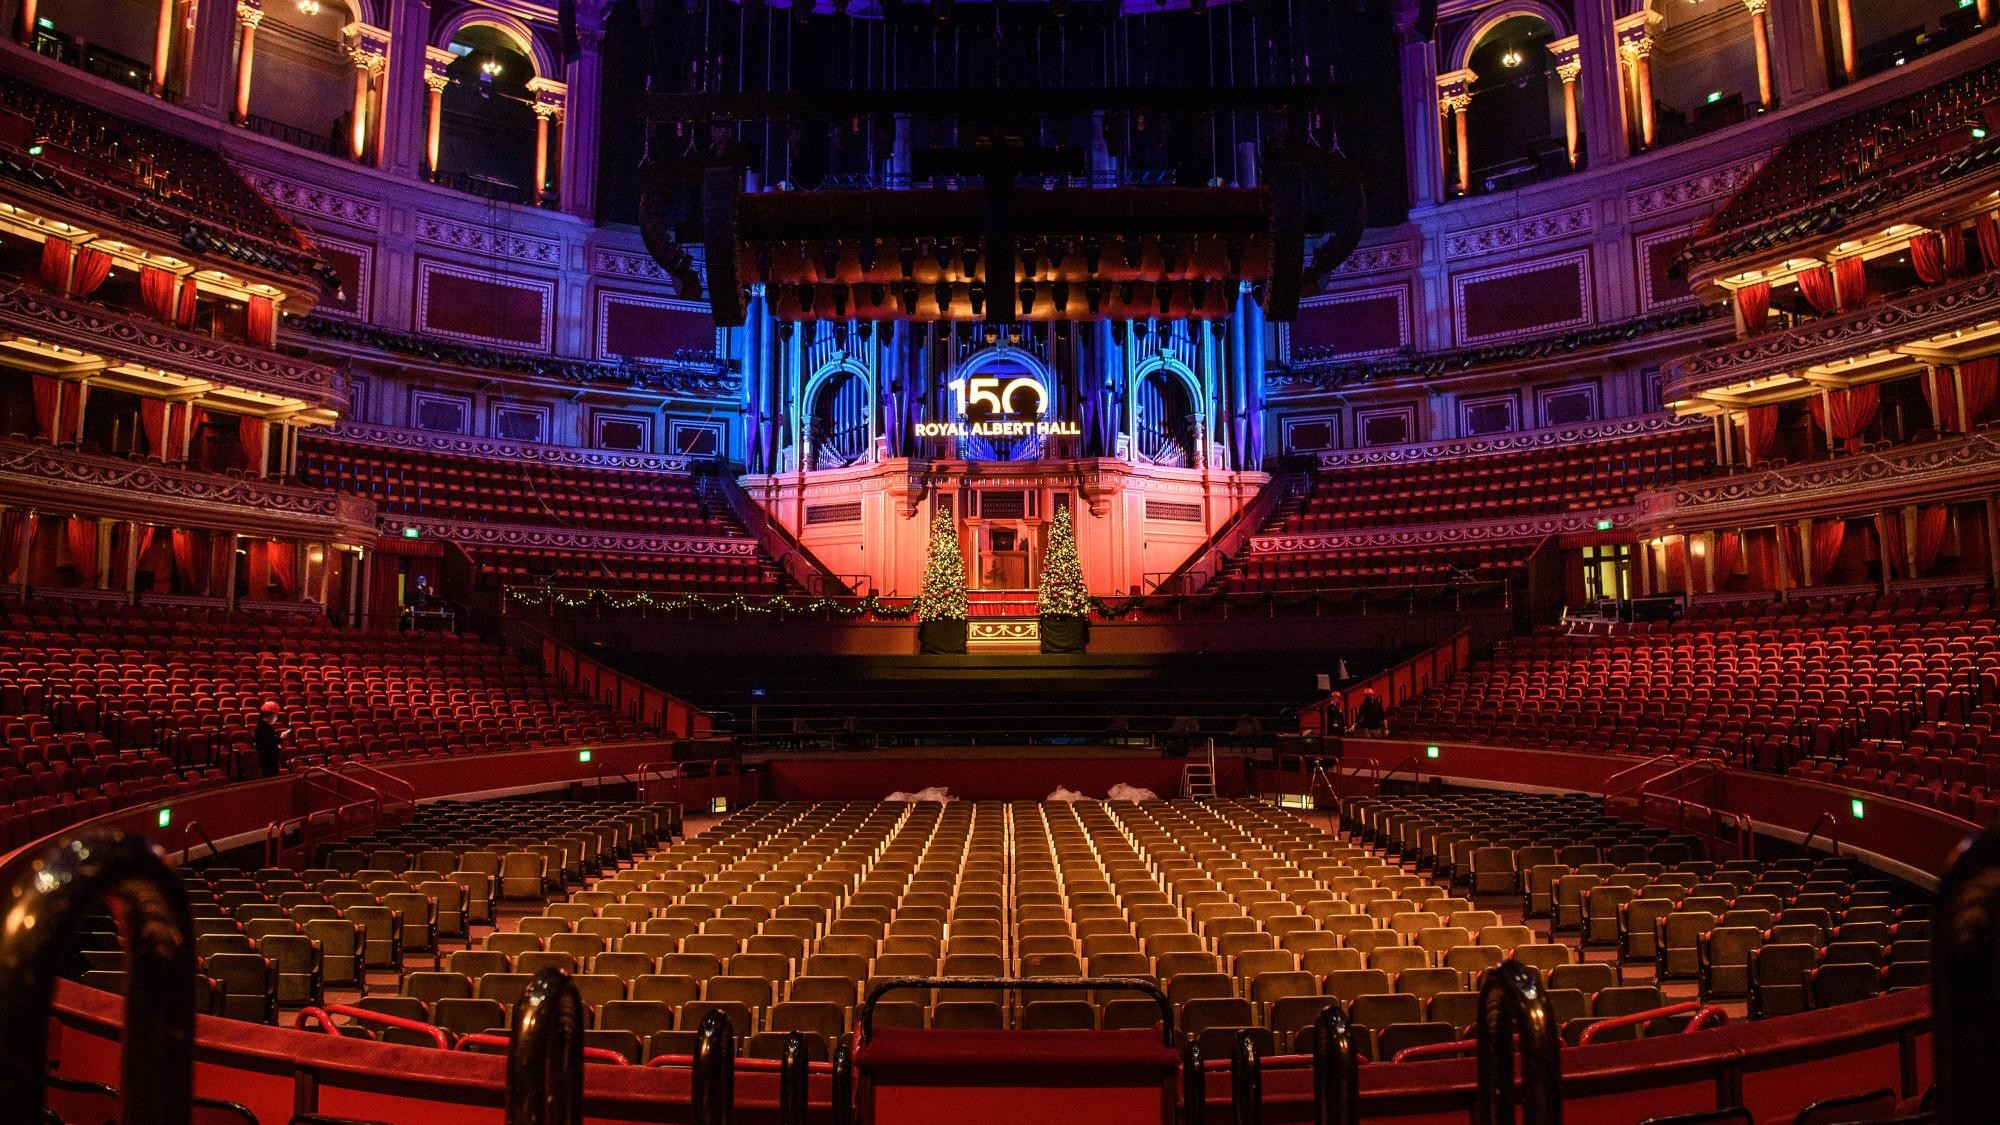 Ceiliúradh (Celebration) at the Royal Albert Hall - Department of Foreign  Affairs